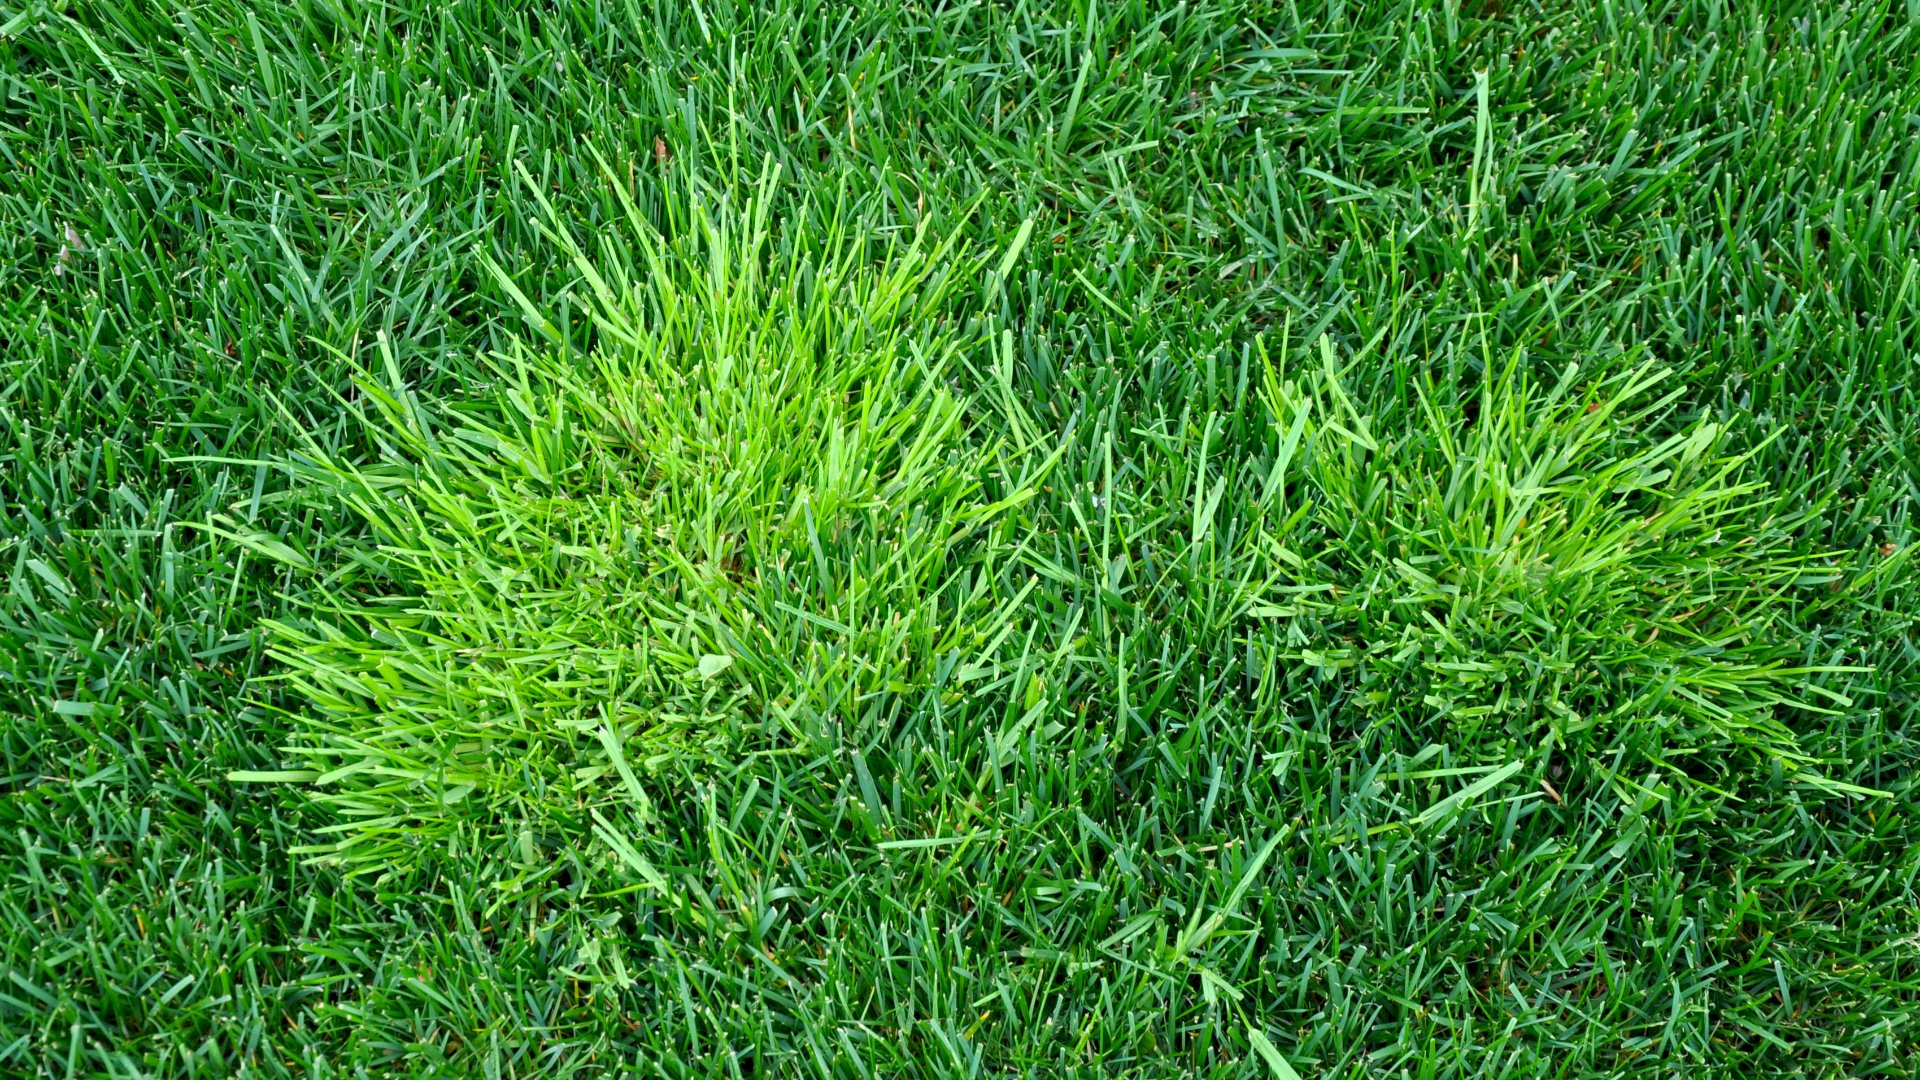 5 Nuisance Weeds to Keep an Eye Out for on Your Lawn in The Villages, FL